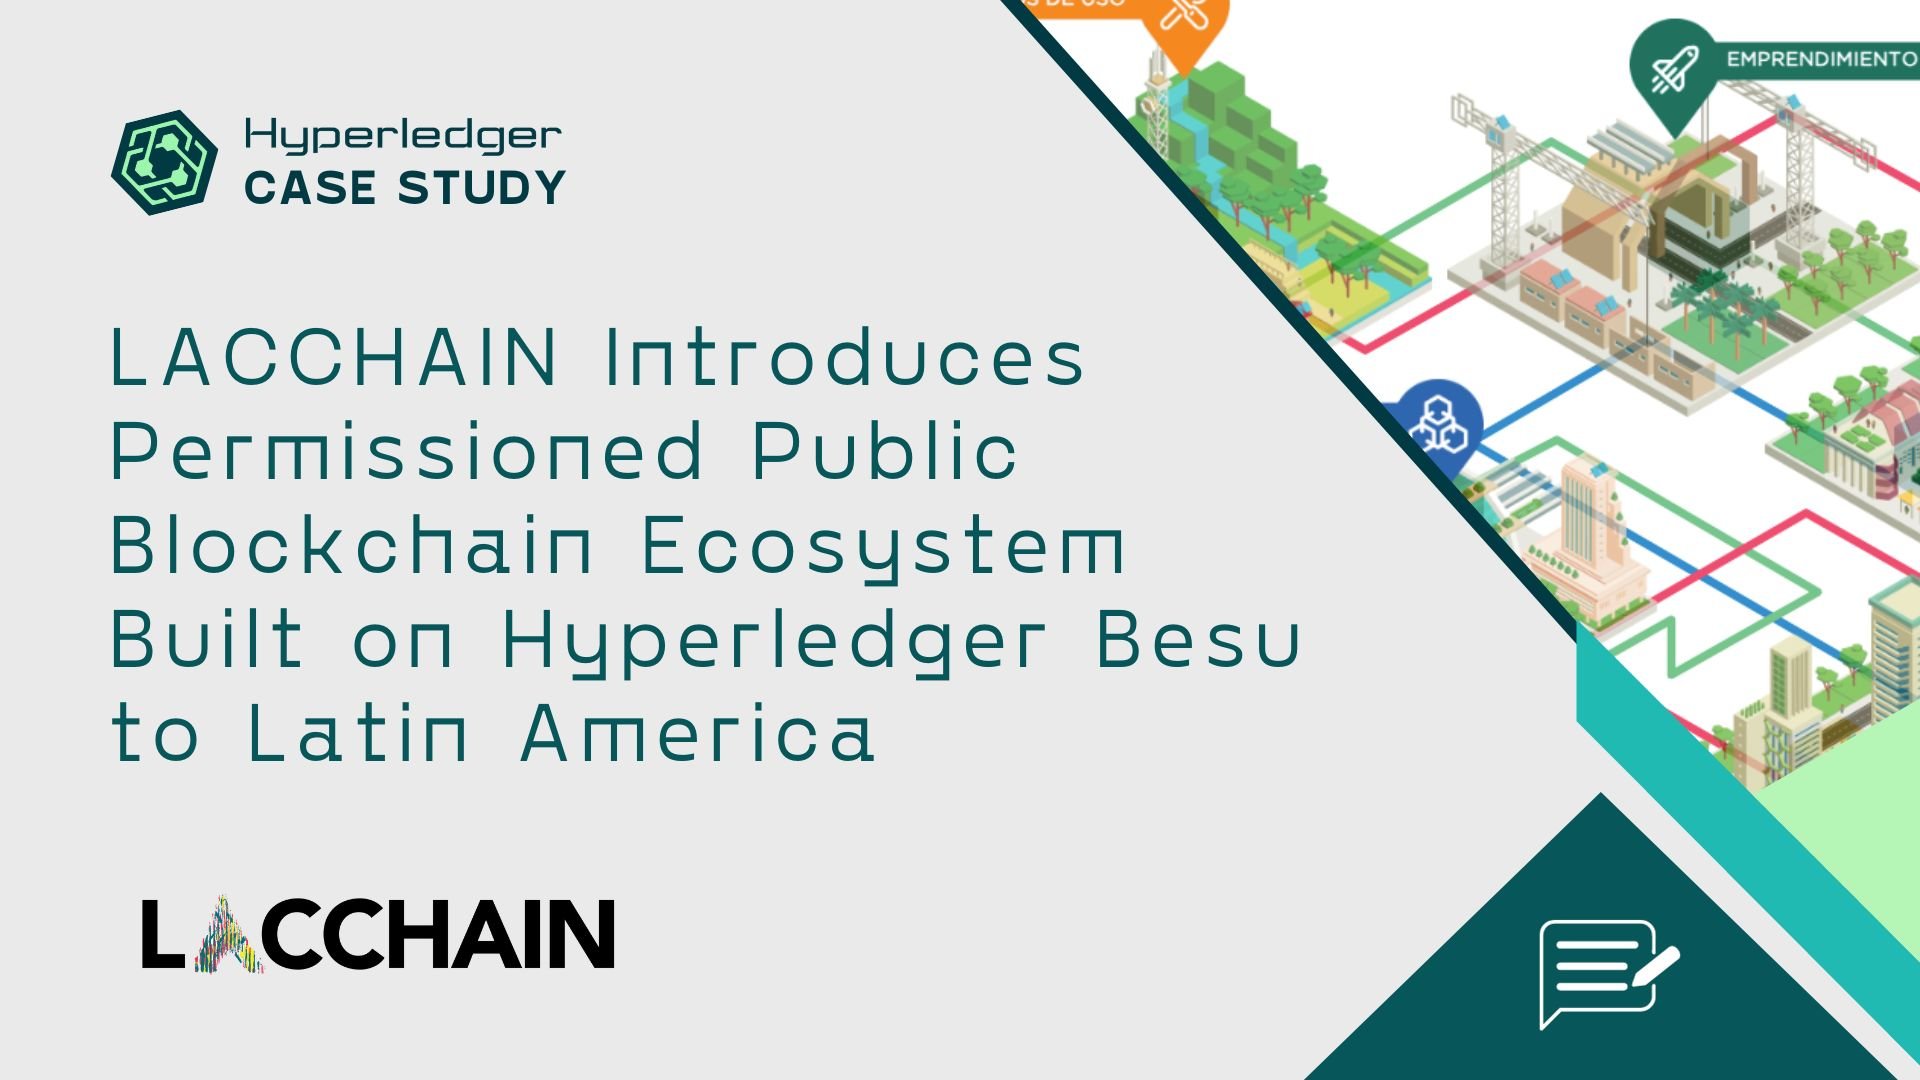 LACChain Introduces Permissioned Public Blockchain Ecosystem Built on Hyperledger Besu to Latin America